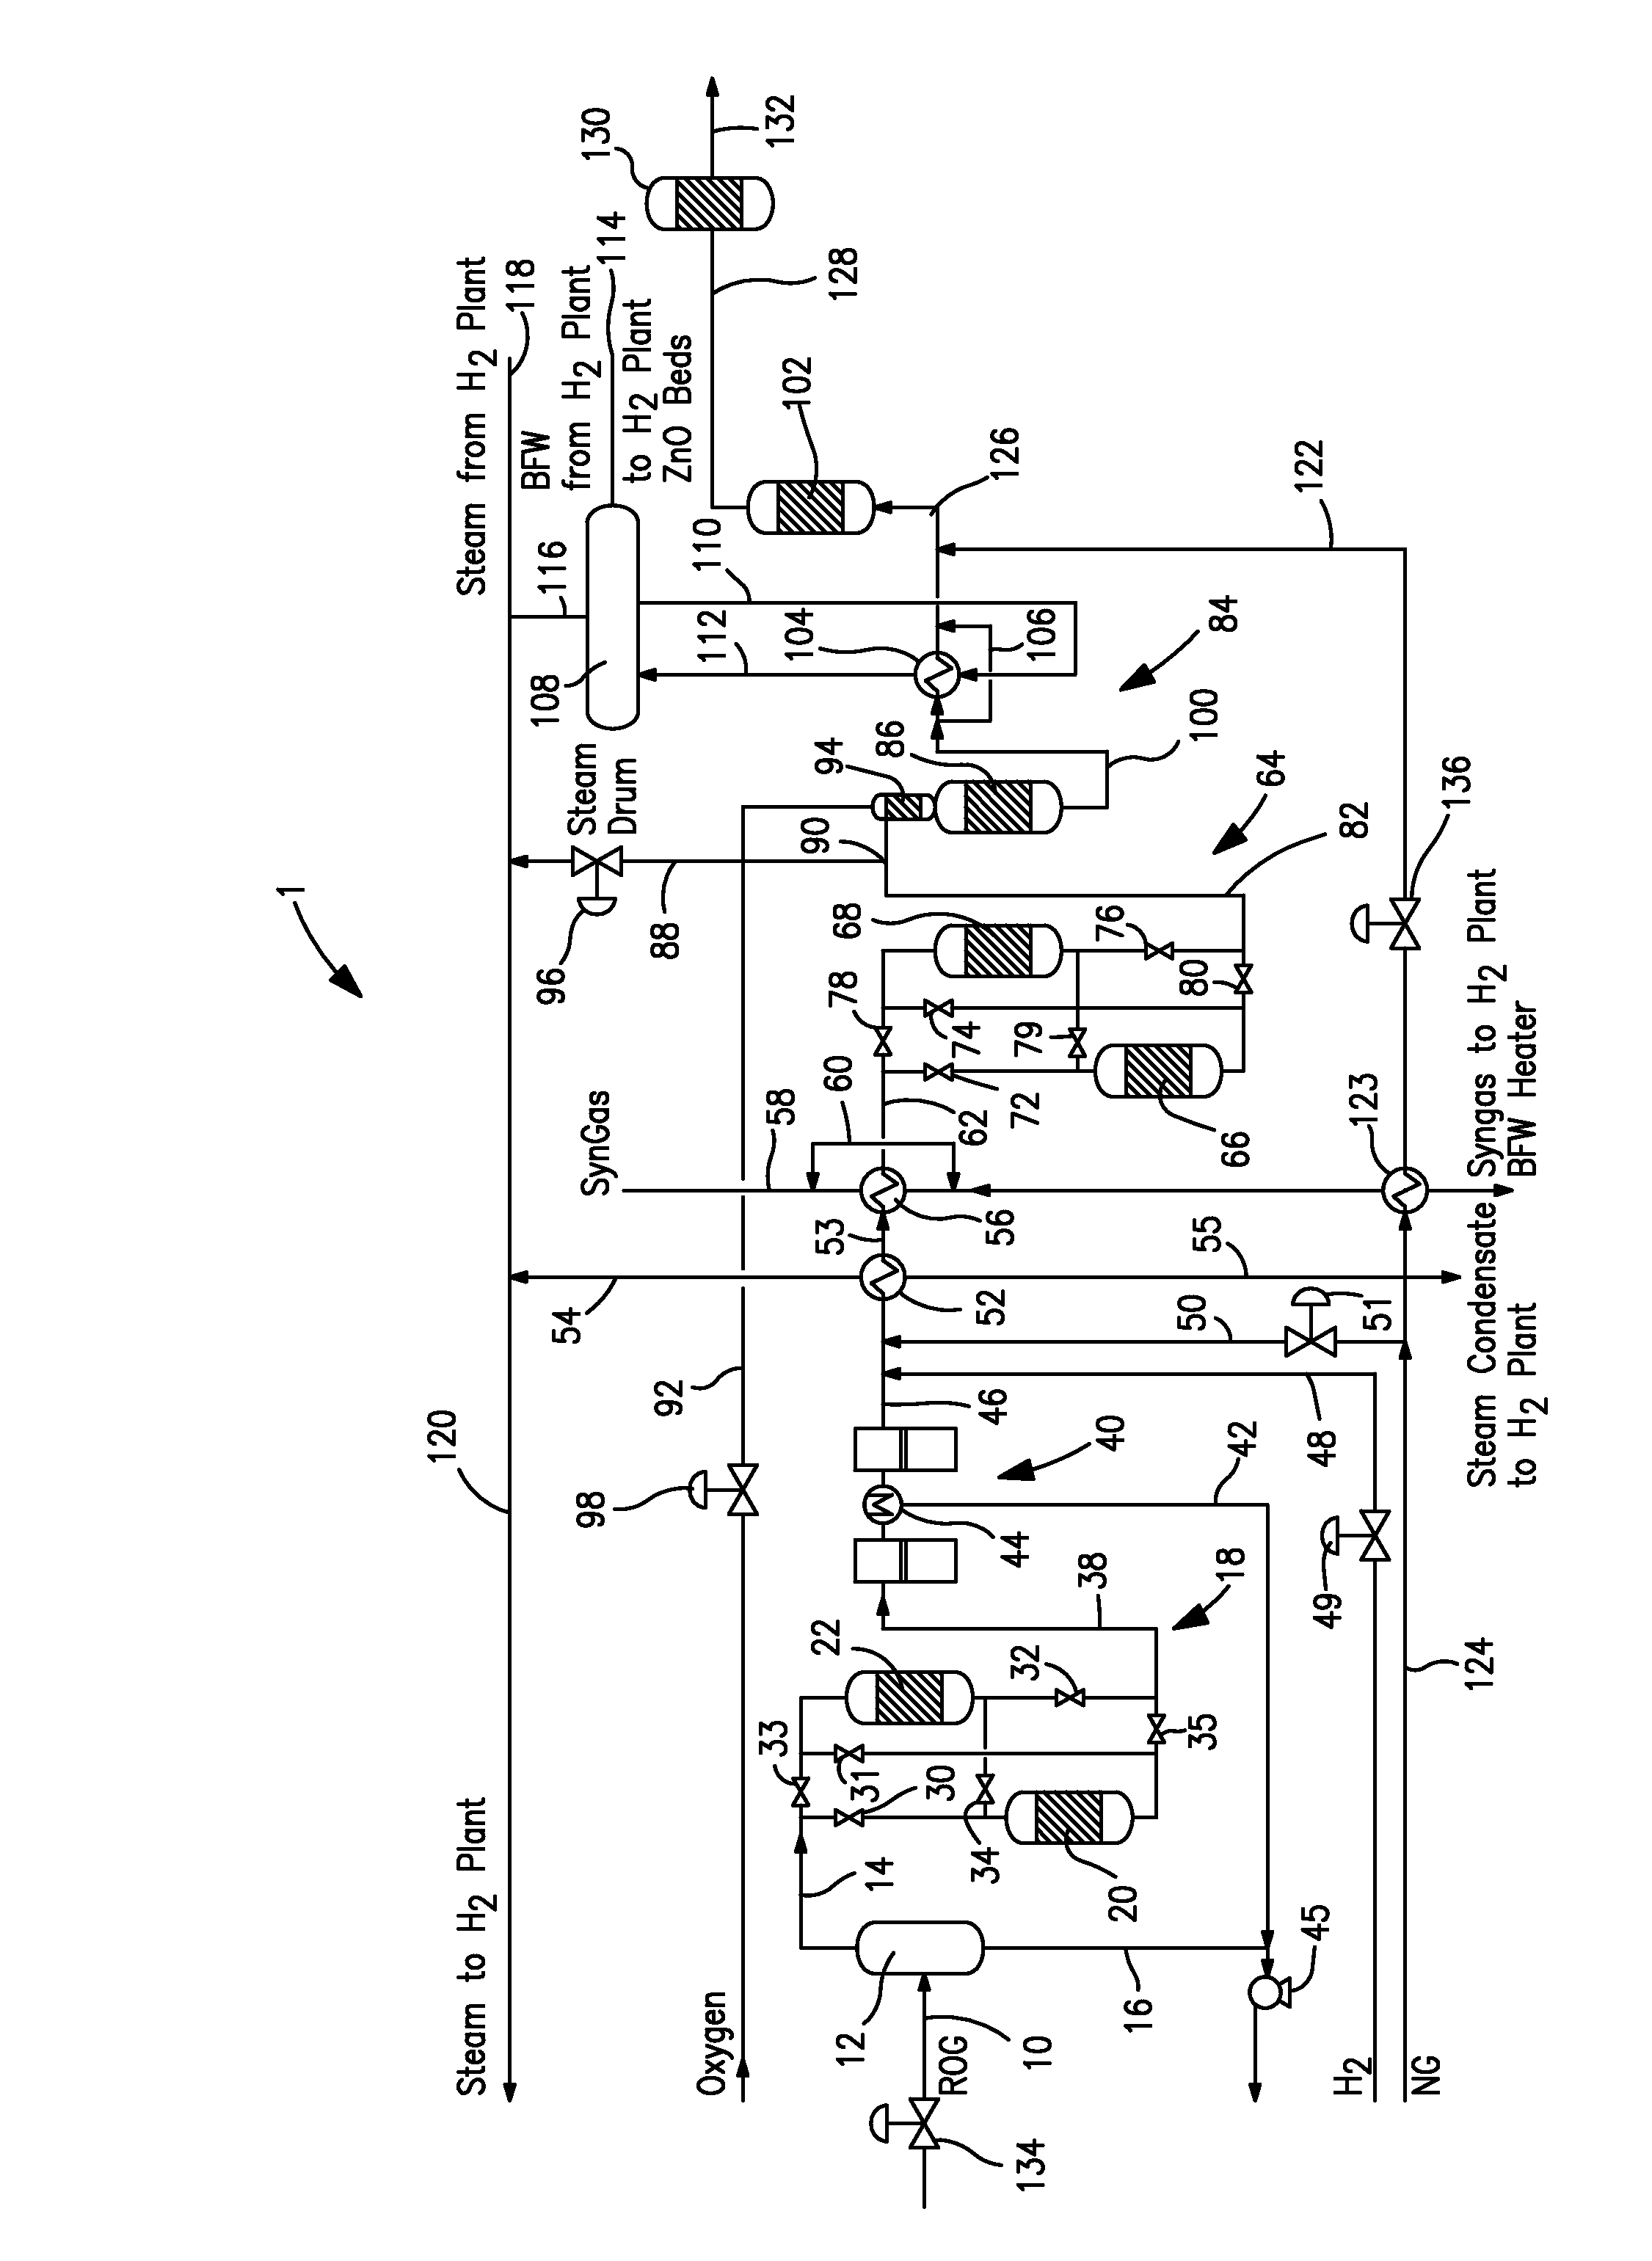 Hydrocarbon treatment method and apparatus